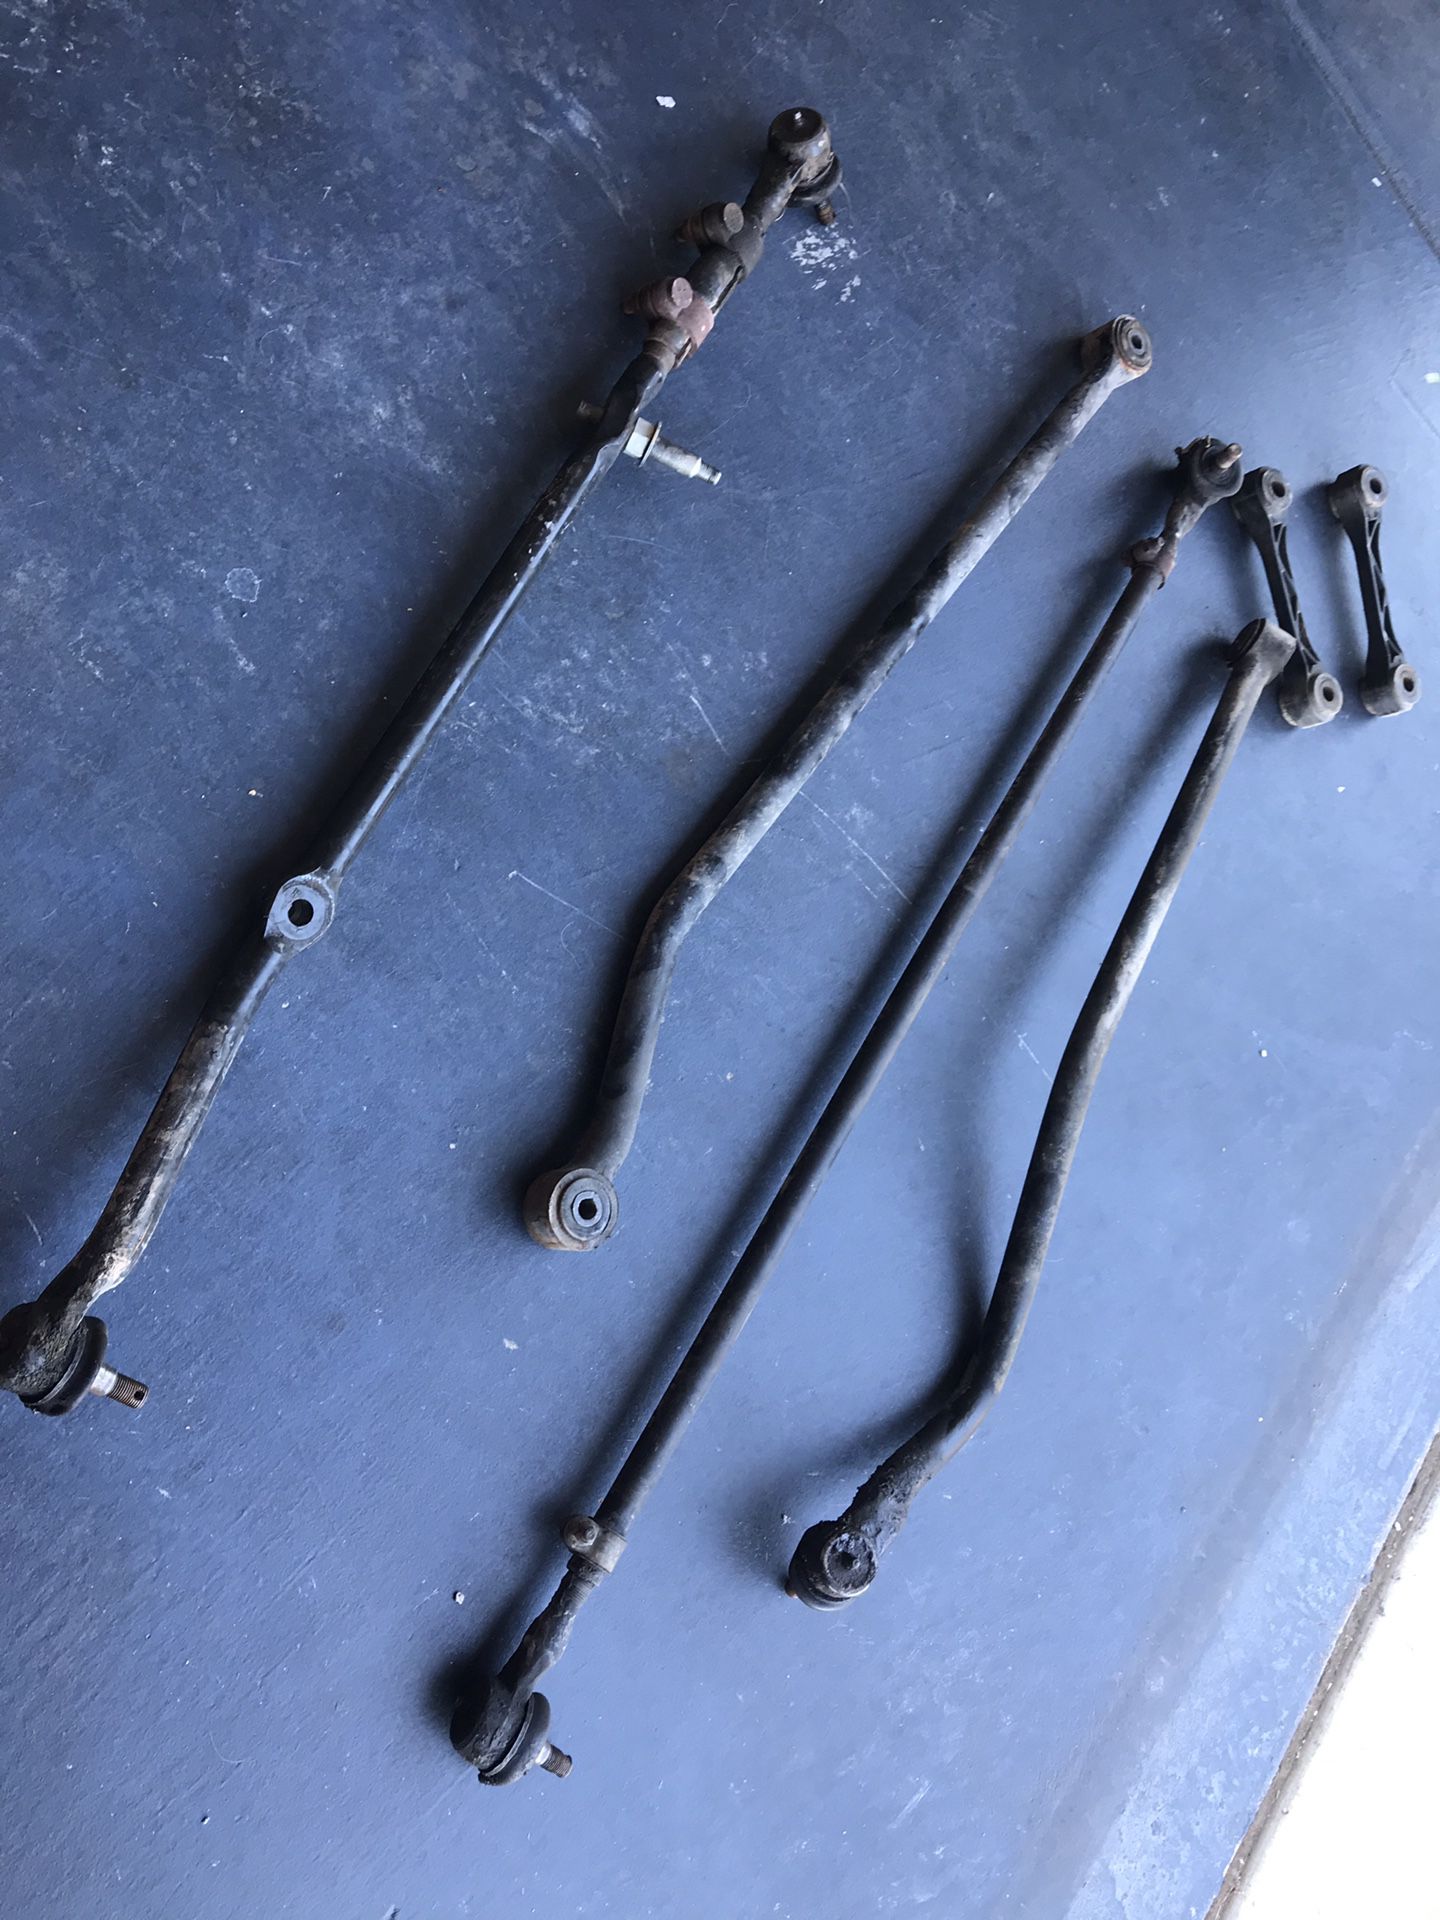 Tie Rod, Drag Lank and Track Bar for a Jeep TJ